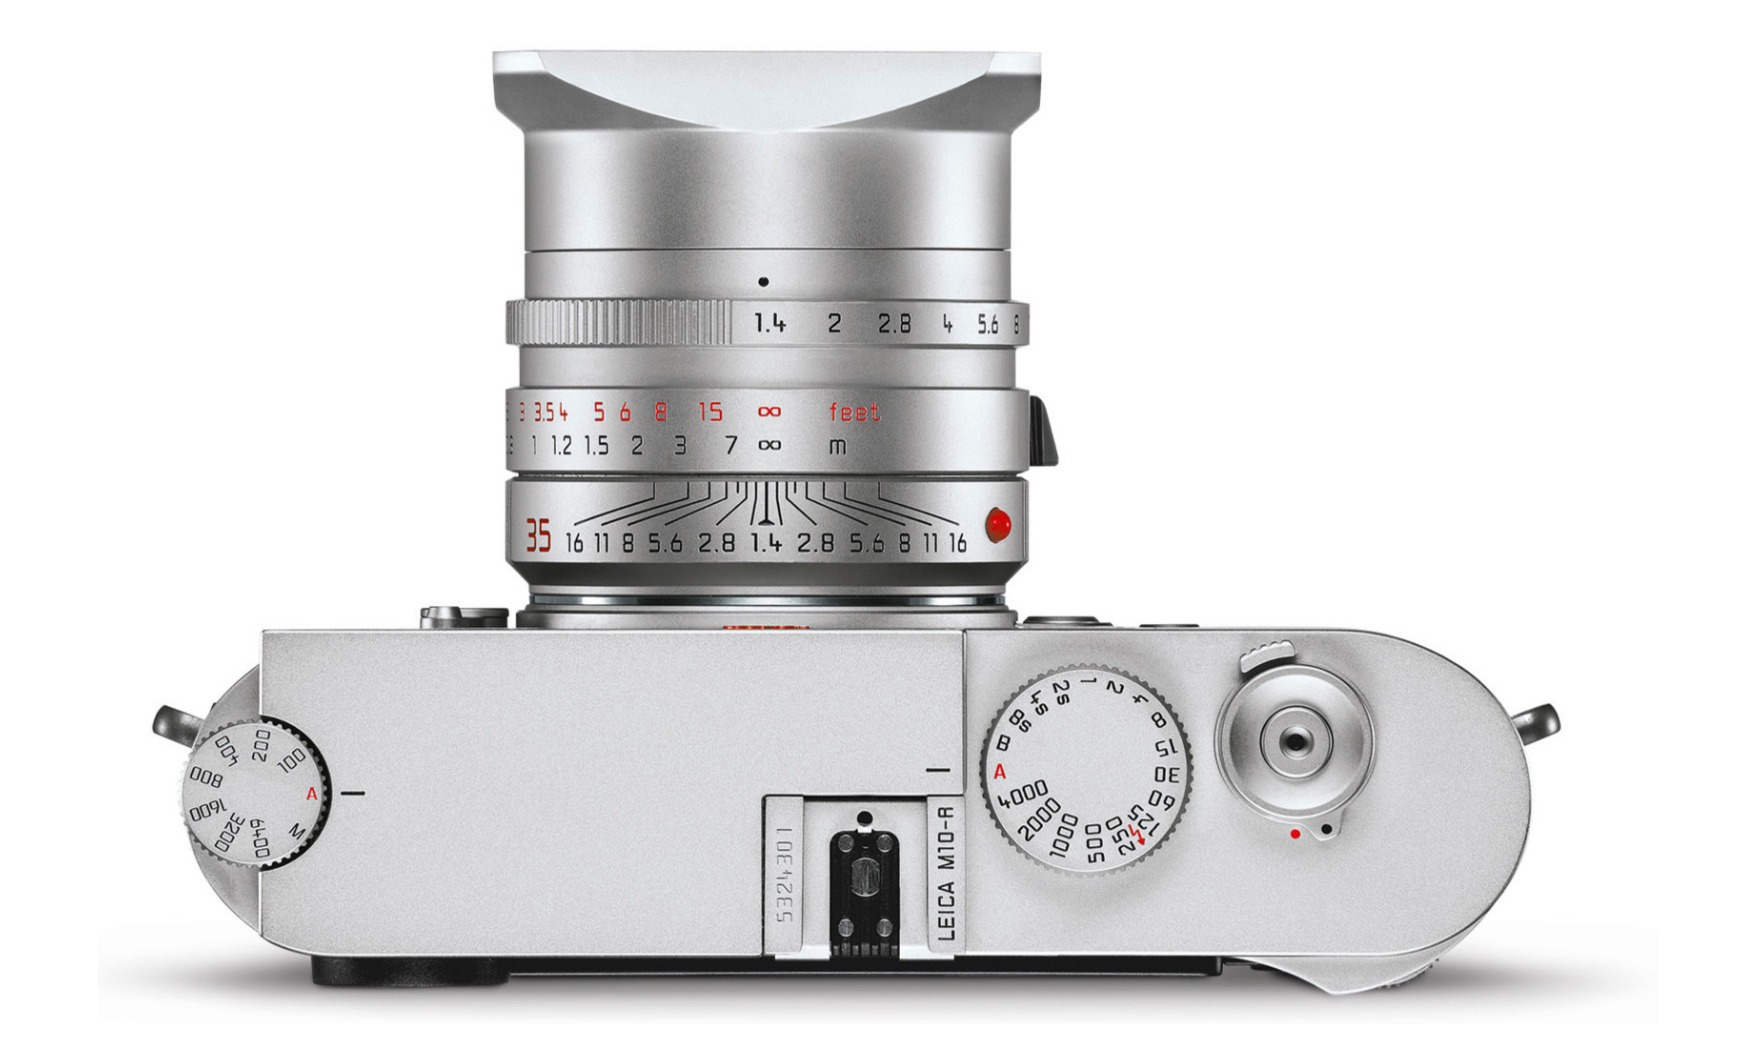 Detailed Leica M10-R camera specifications leaked online - Leica 